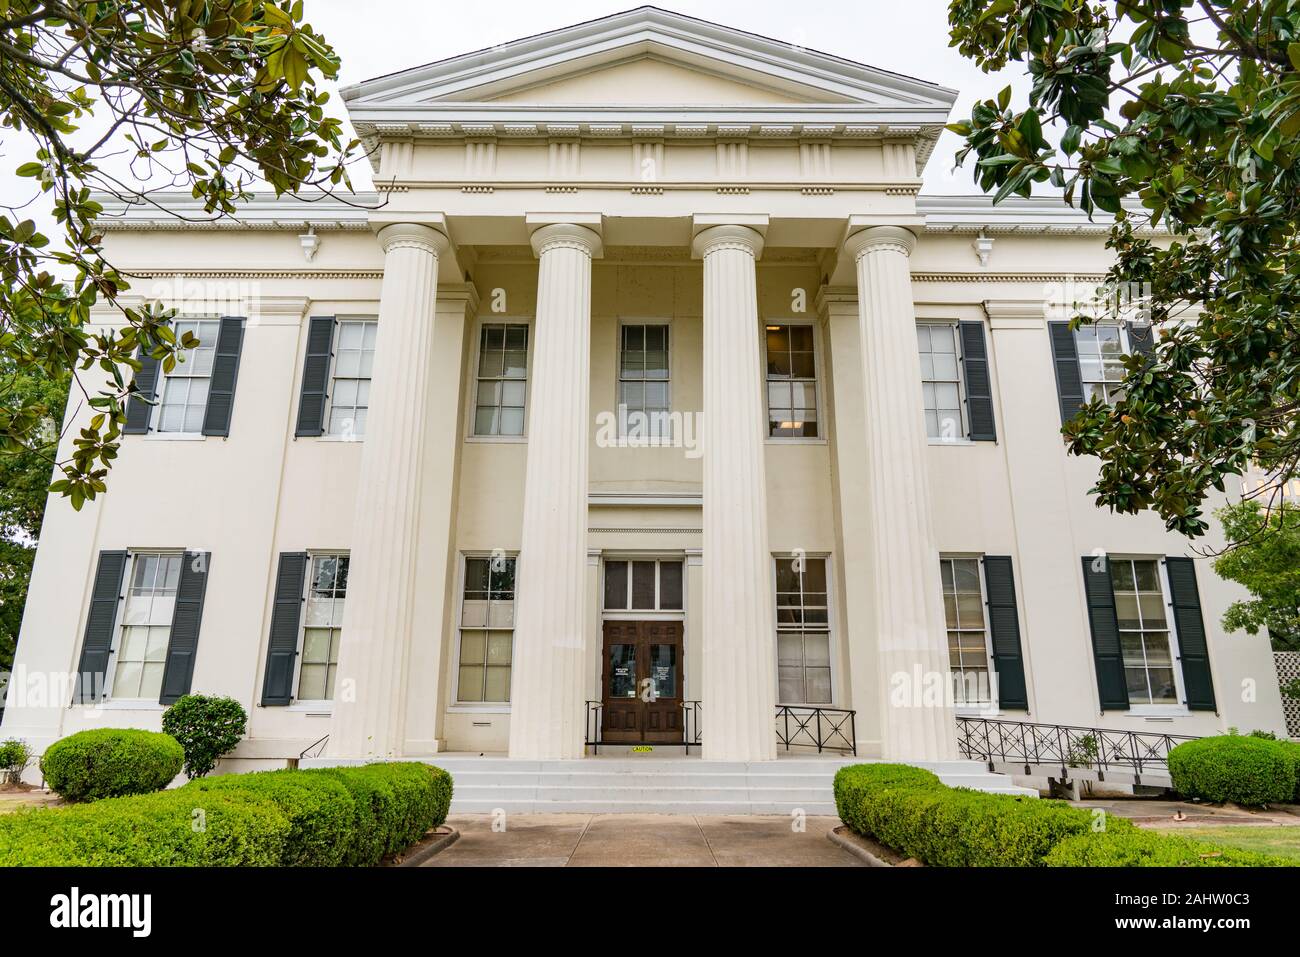 Jackson, MS - October 7, 2019: Exterior of the Jackson, Mississippi City Hall building Stock Photo